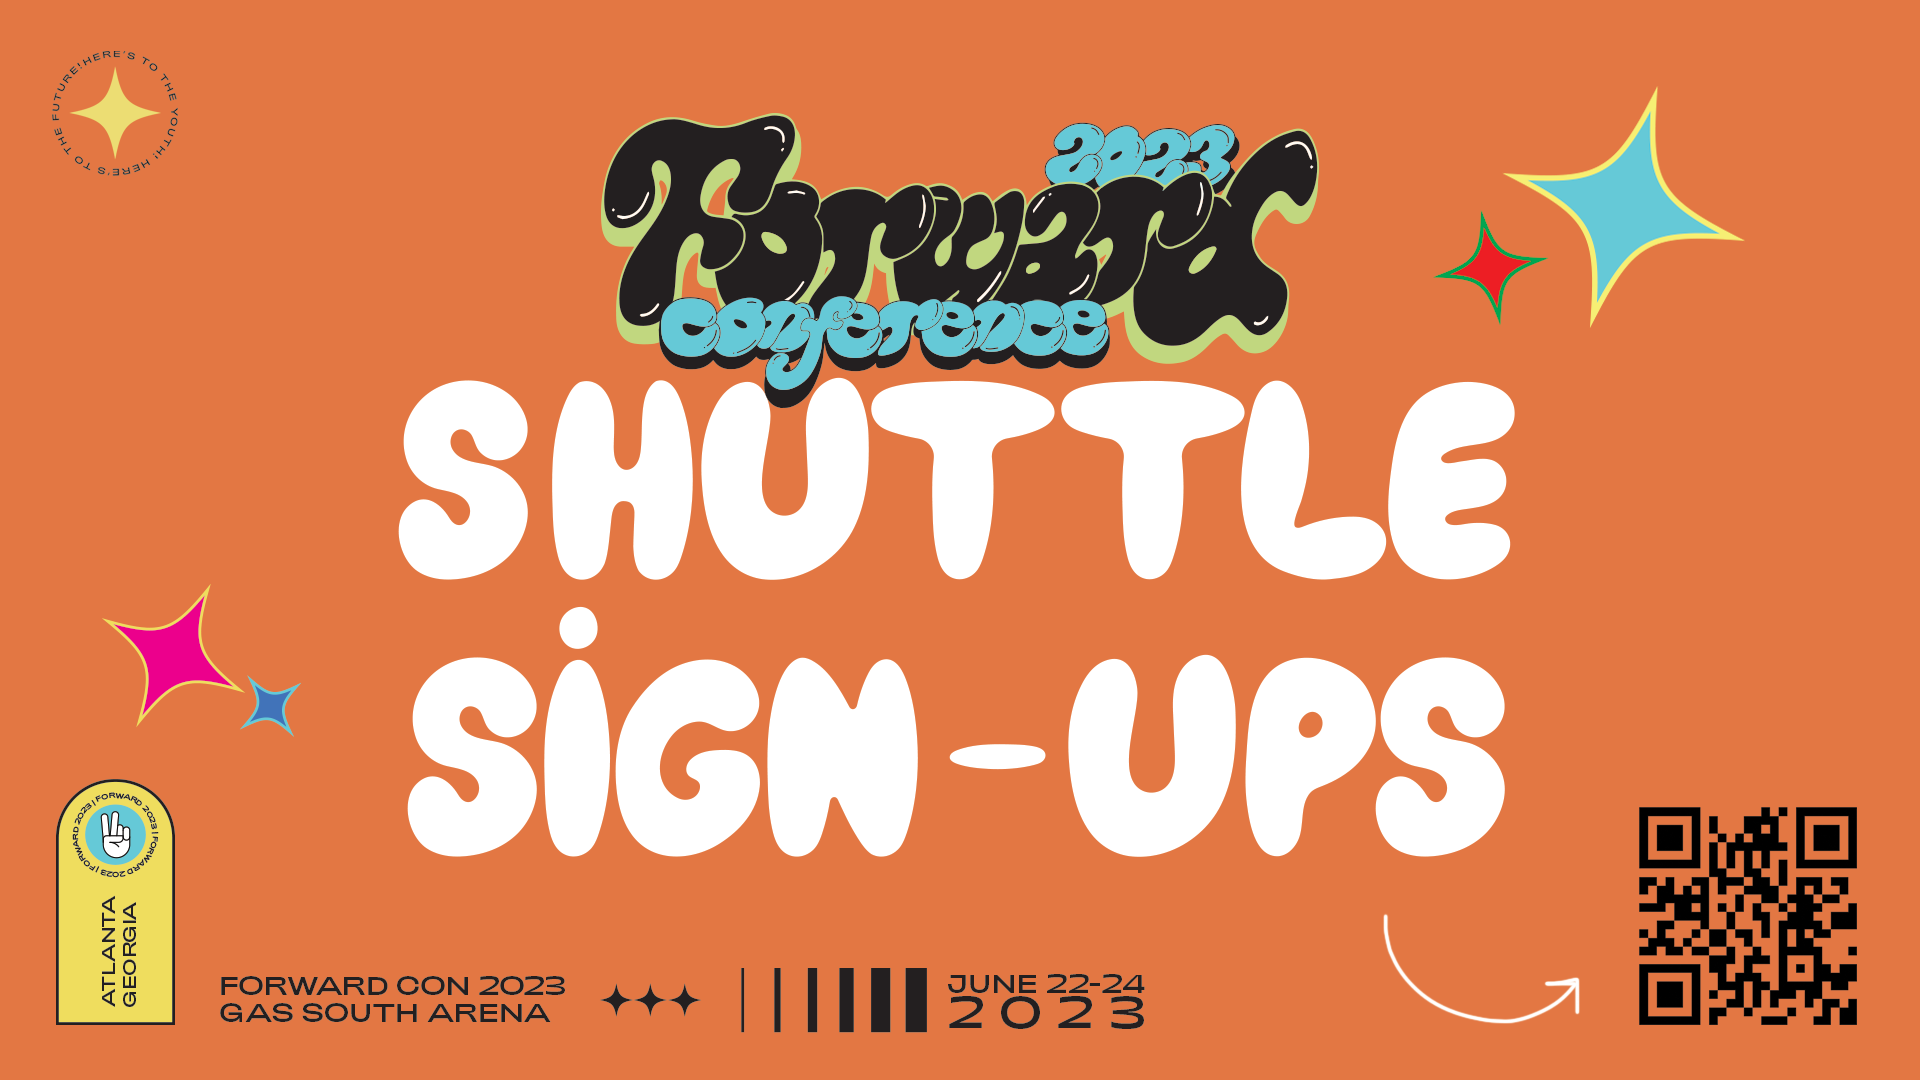 Forward Shuttle Sign Up at the Braselton campus